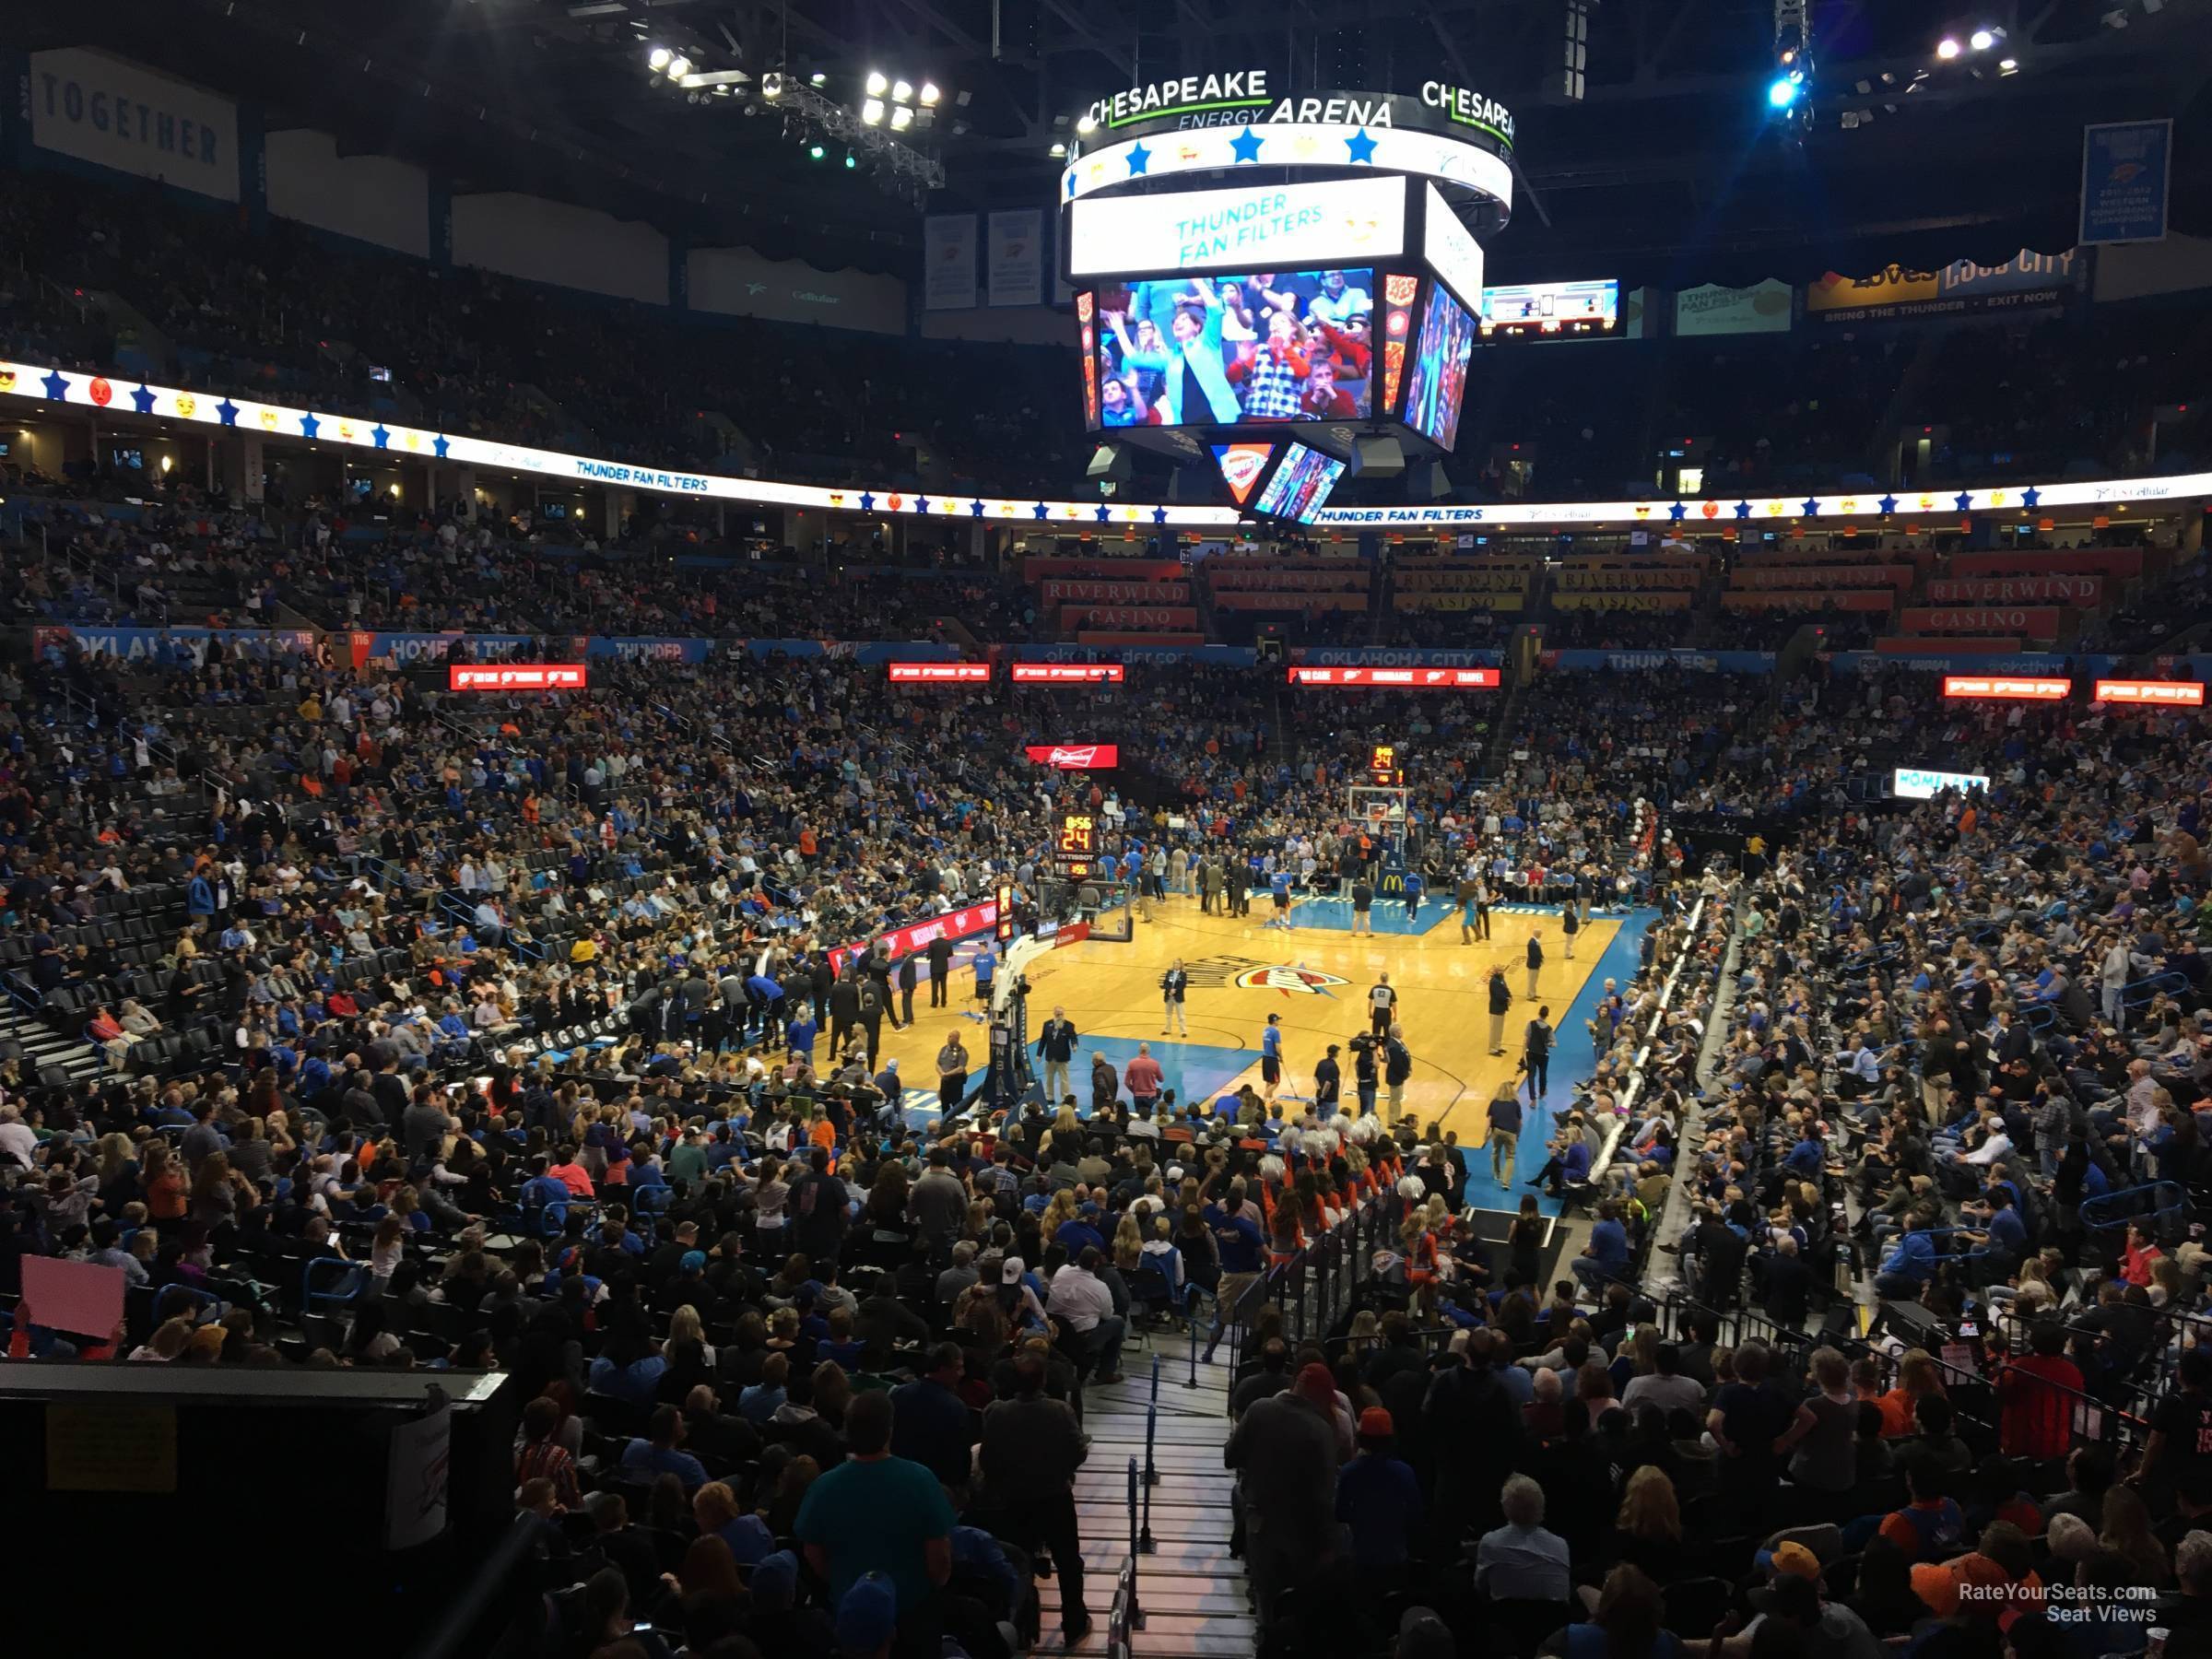 section 109, row u seat view  for basketball - paycom center